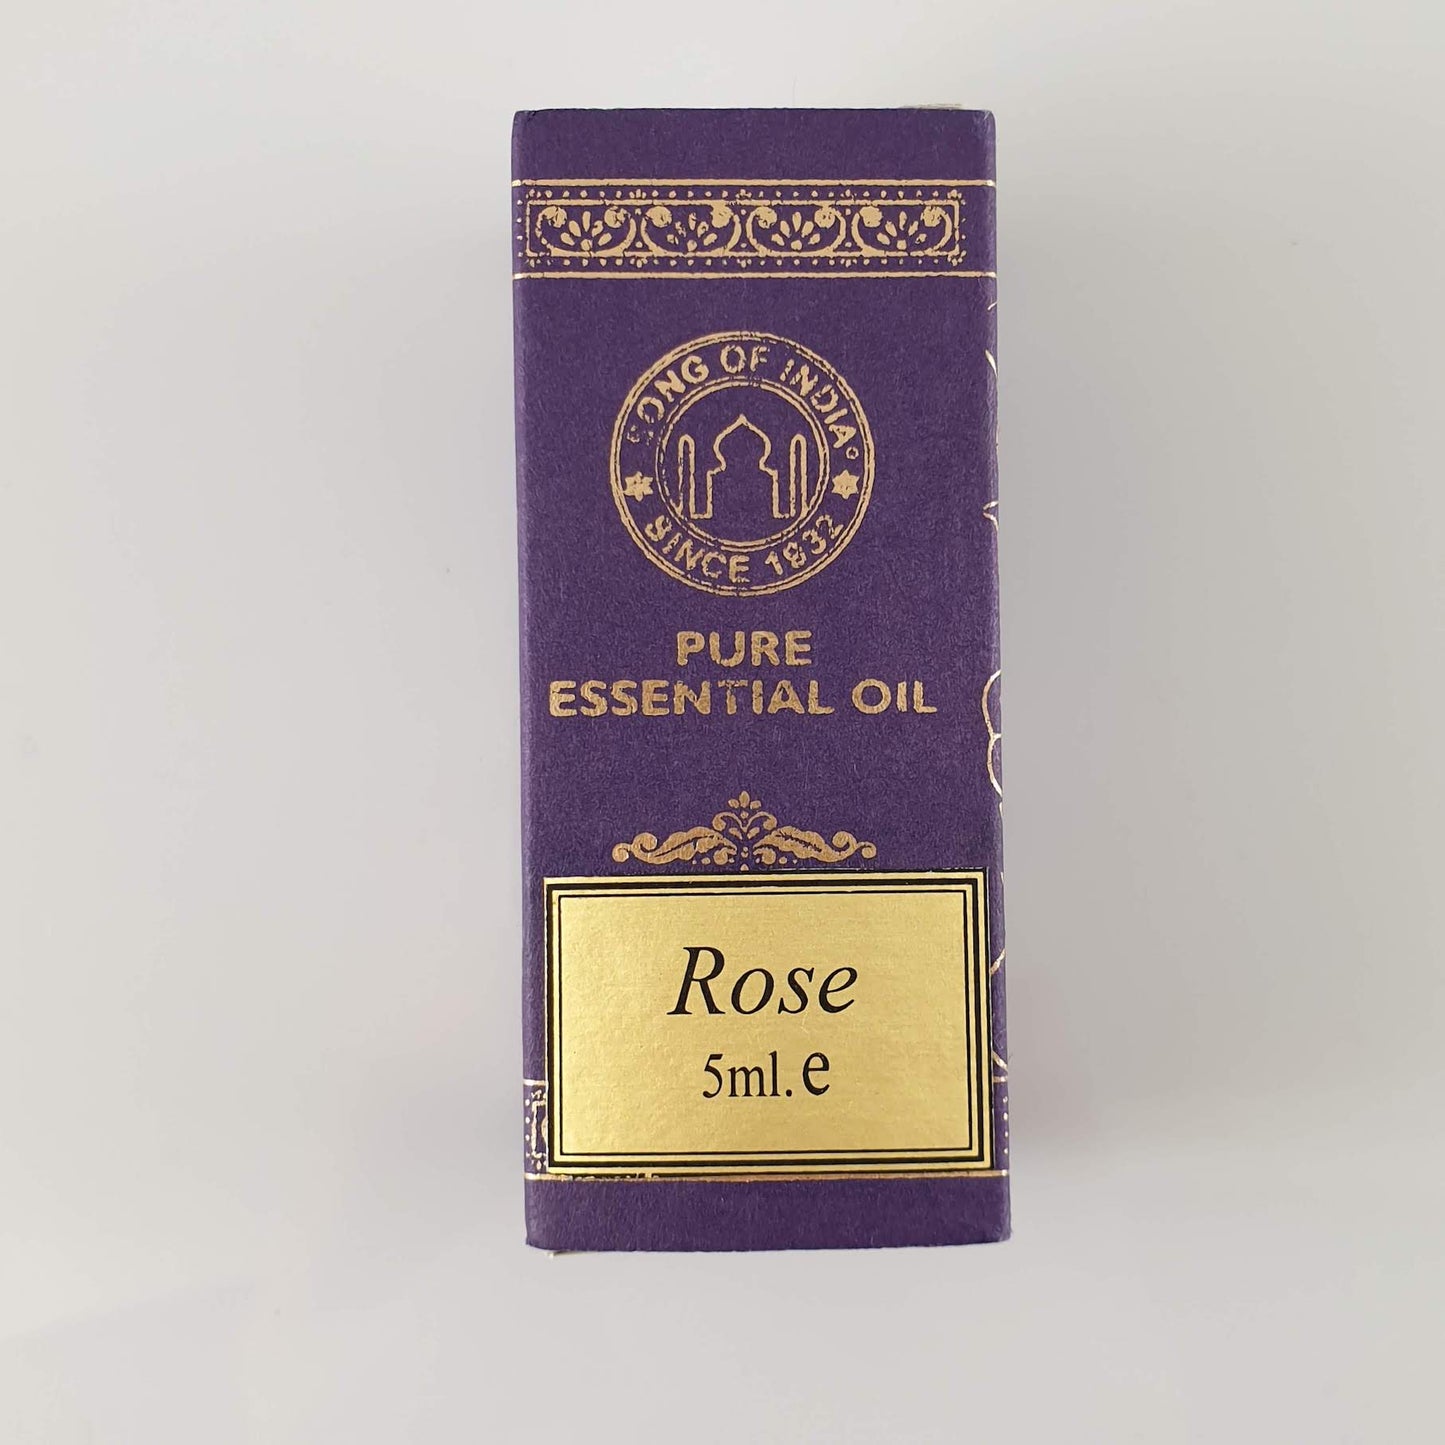 Song of India Essential Oil - Rose 5ml - Rivendell Shop